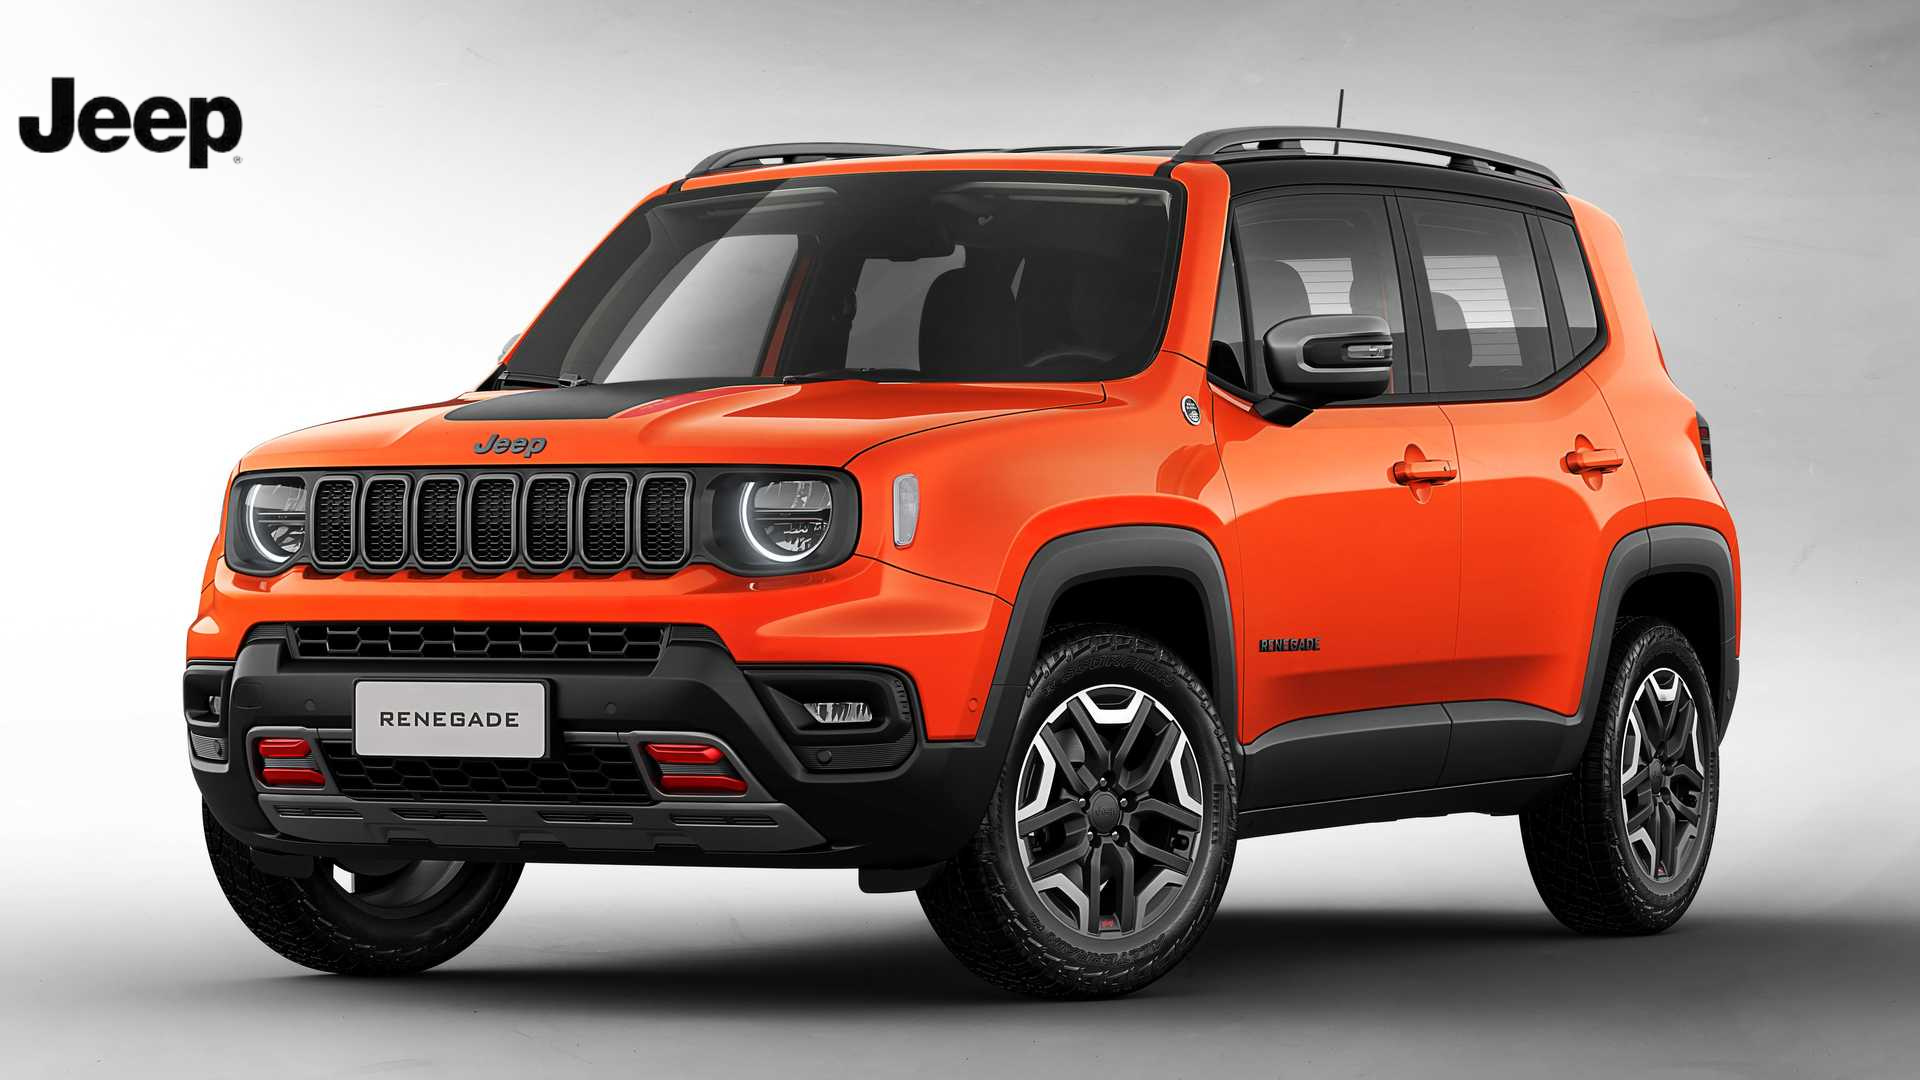 2022 Jeep Renegade Specifications